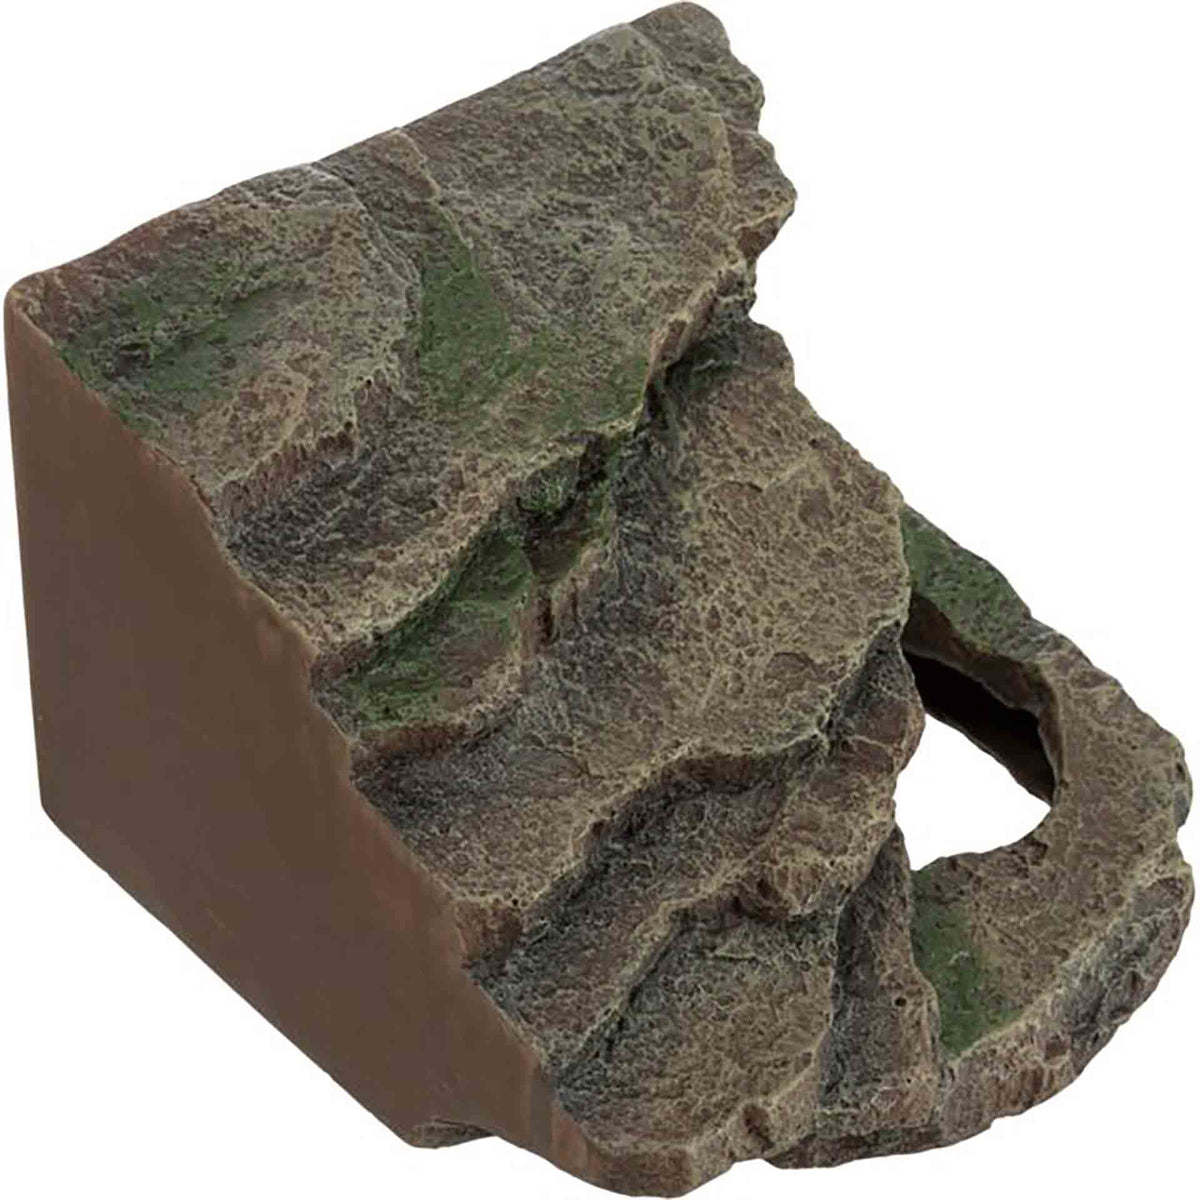 Trixie Corner Rock with Cave and Platform - 16 x 12 x 15cm